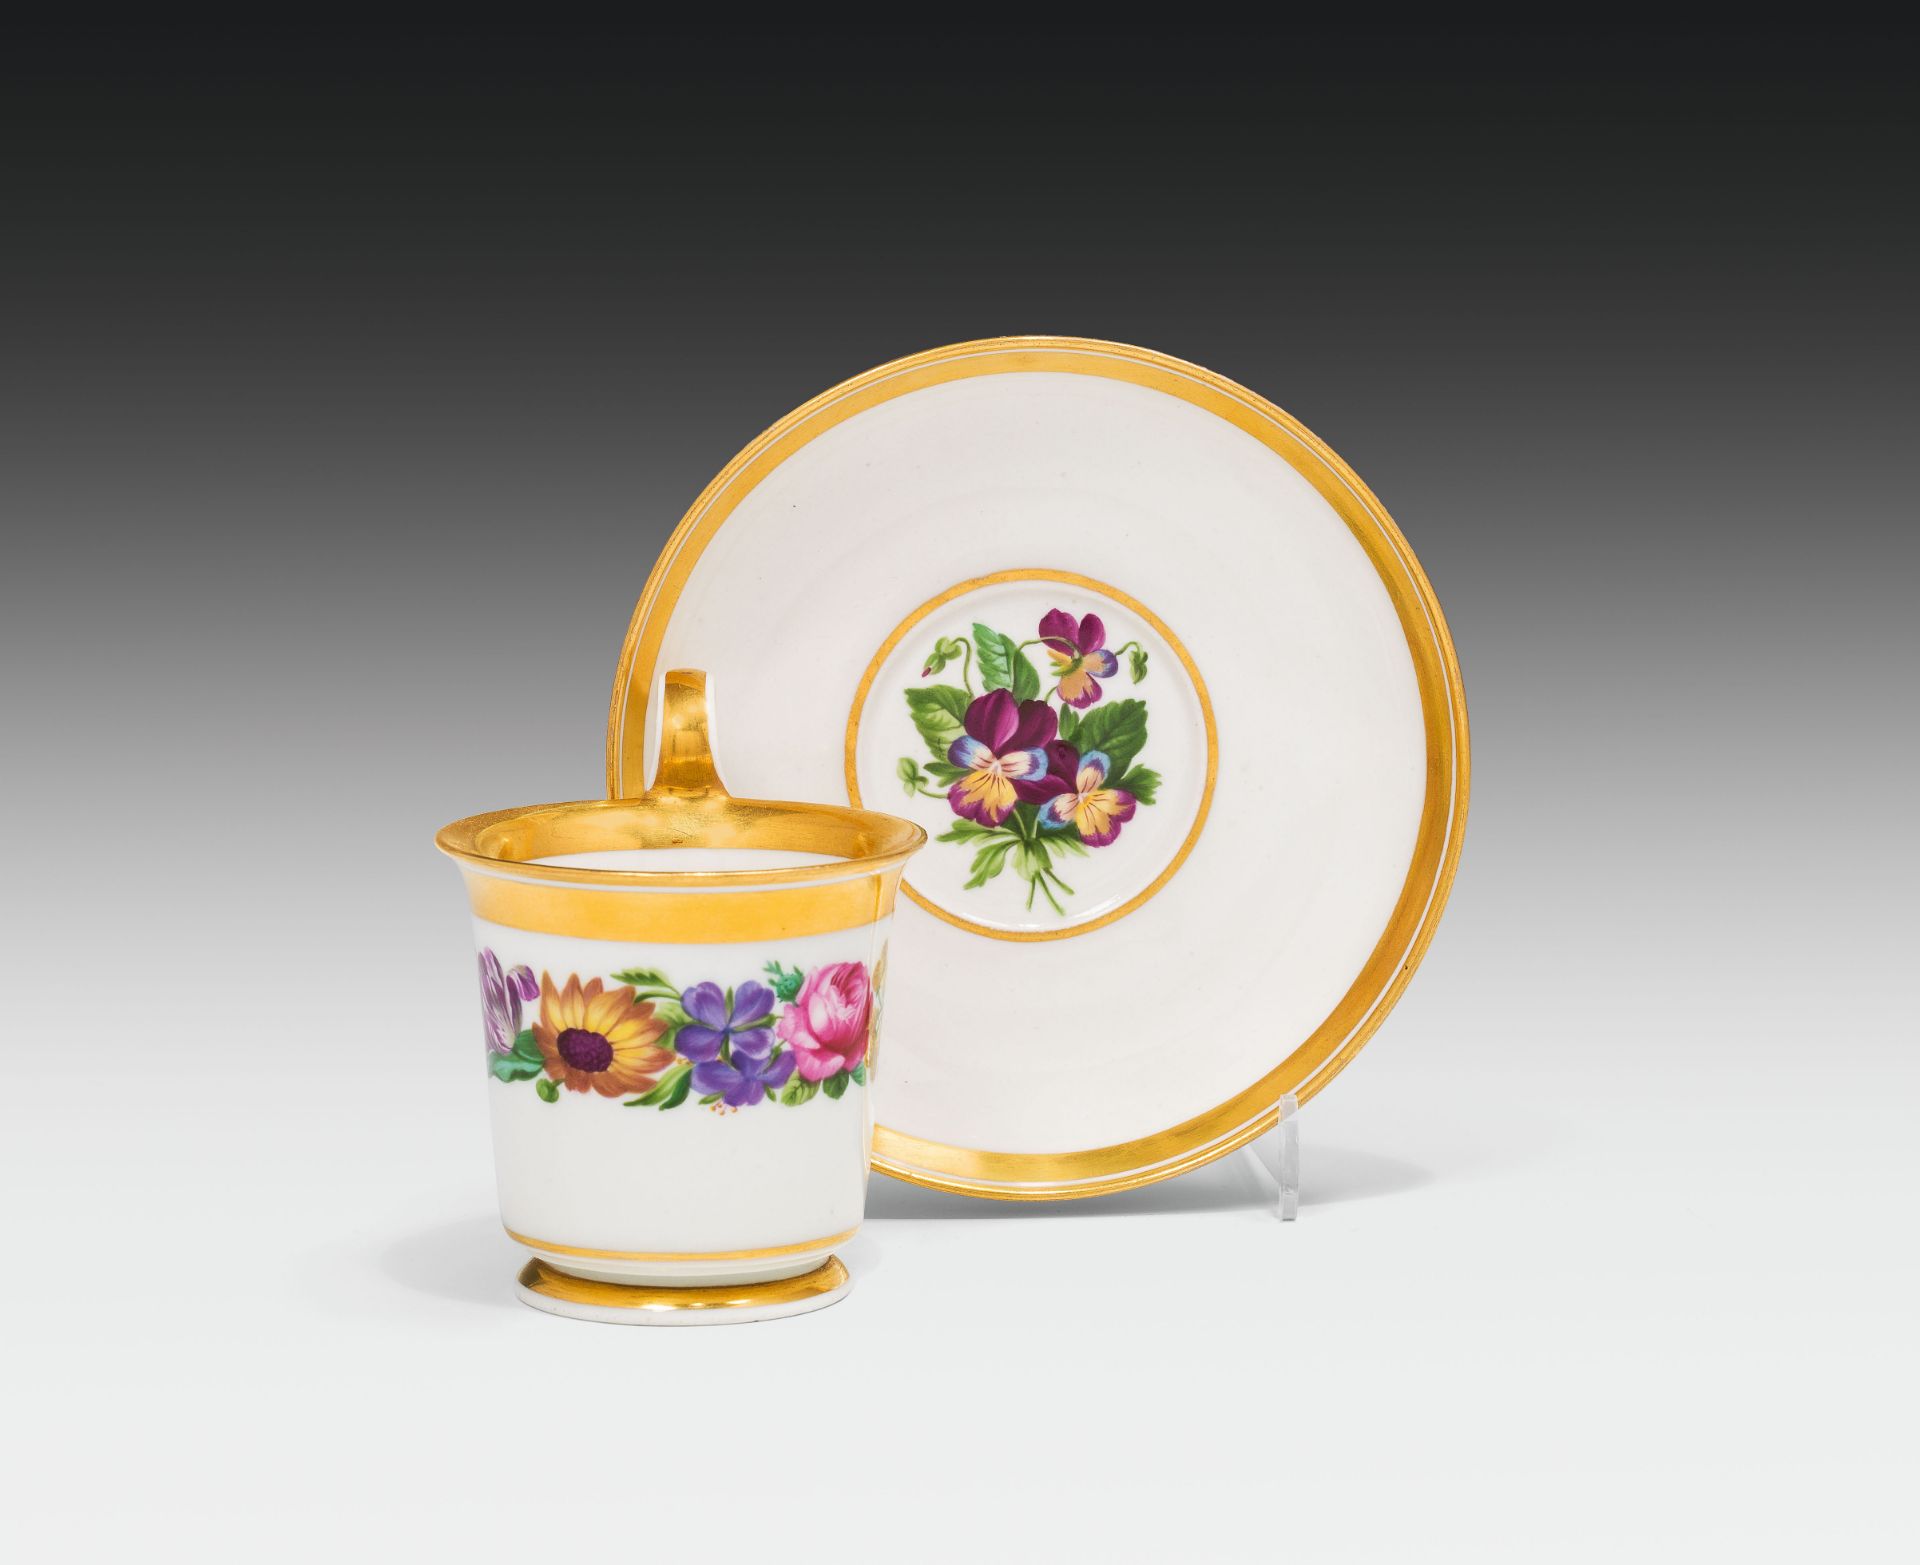 Cup and saucerporcelain, colourfully painted and glazed, partly gilded; inscribed on the bottom: "